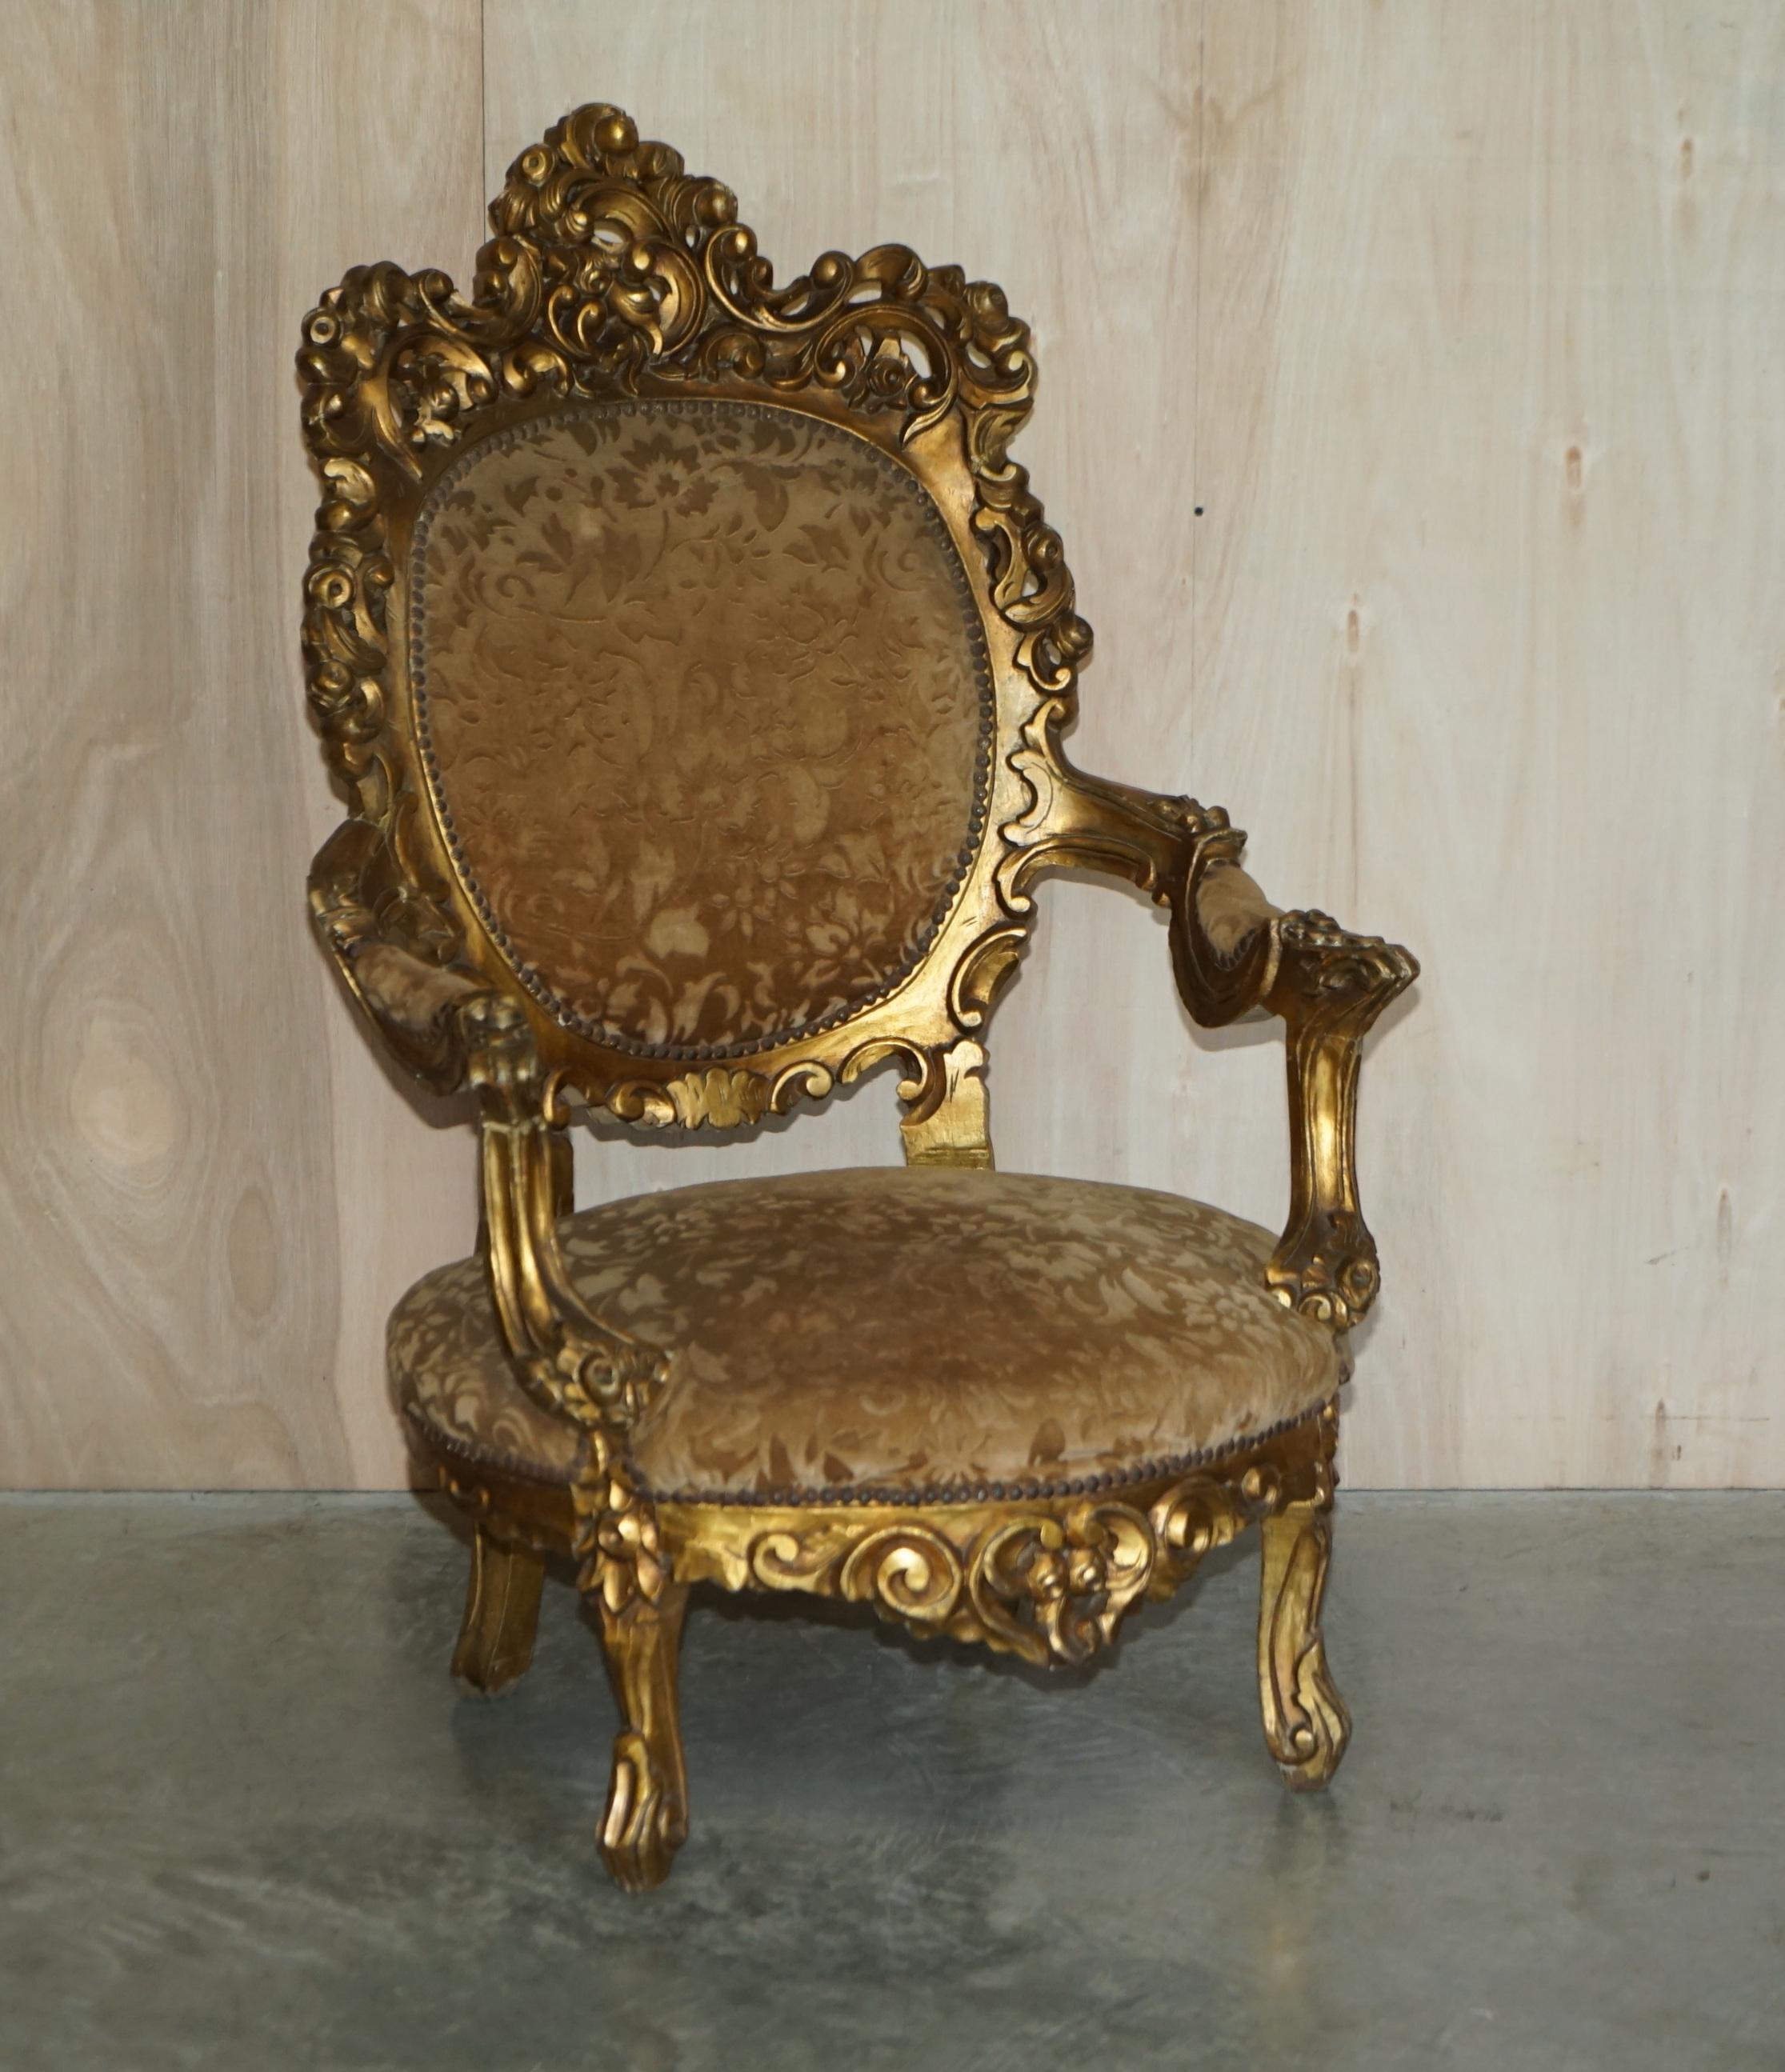 Royal House Antiques

Royal House Antiques is delighted to offer for sale this pair of antique Louis XV French giltwood Fauteuils

Please note the delivery fee listed is just a guide, it covers within the M25 only for the UK and local Europe only